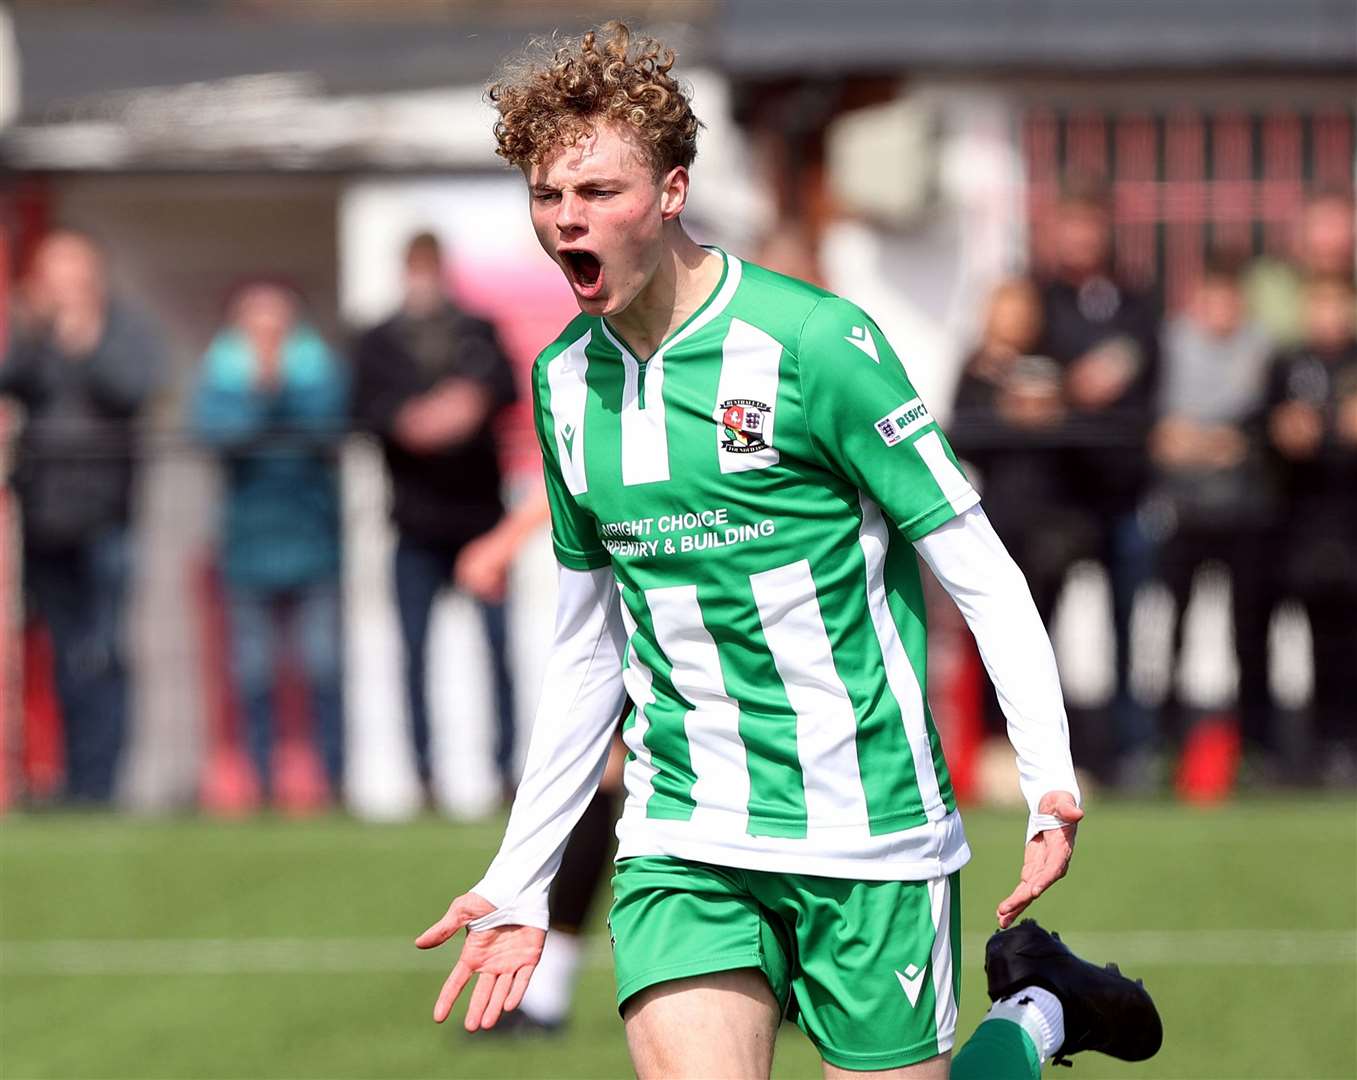 Hayden Marshall celebrates scoring what proved to be the winner for Rusthall under-18s. Picture: PSP Images